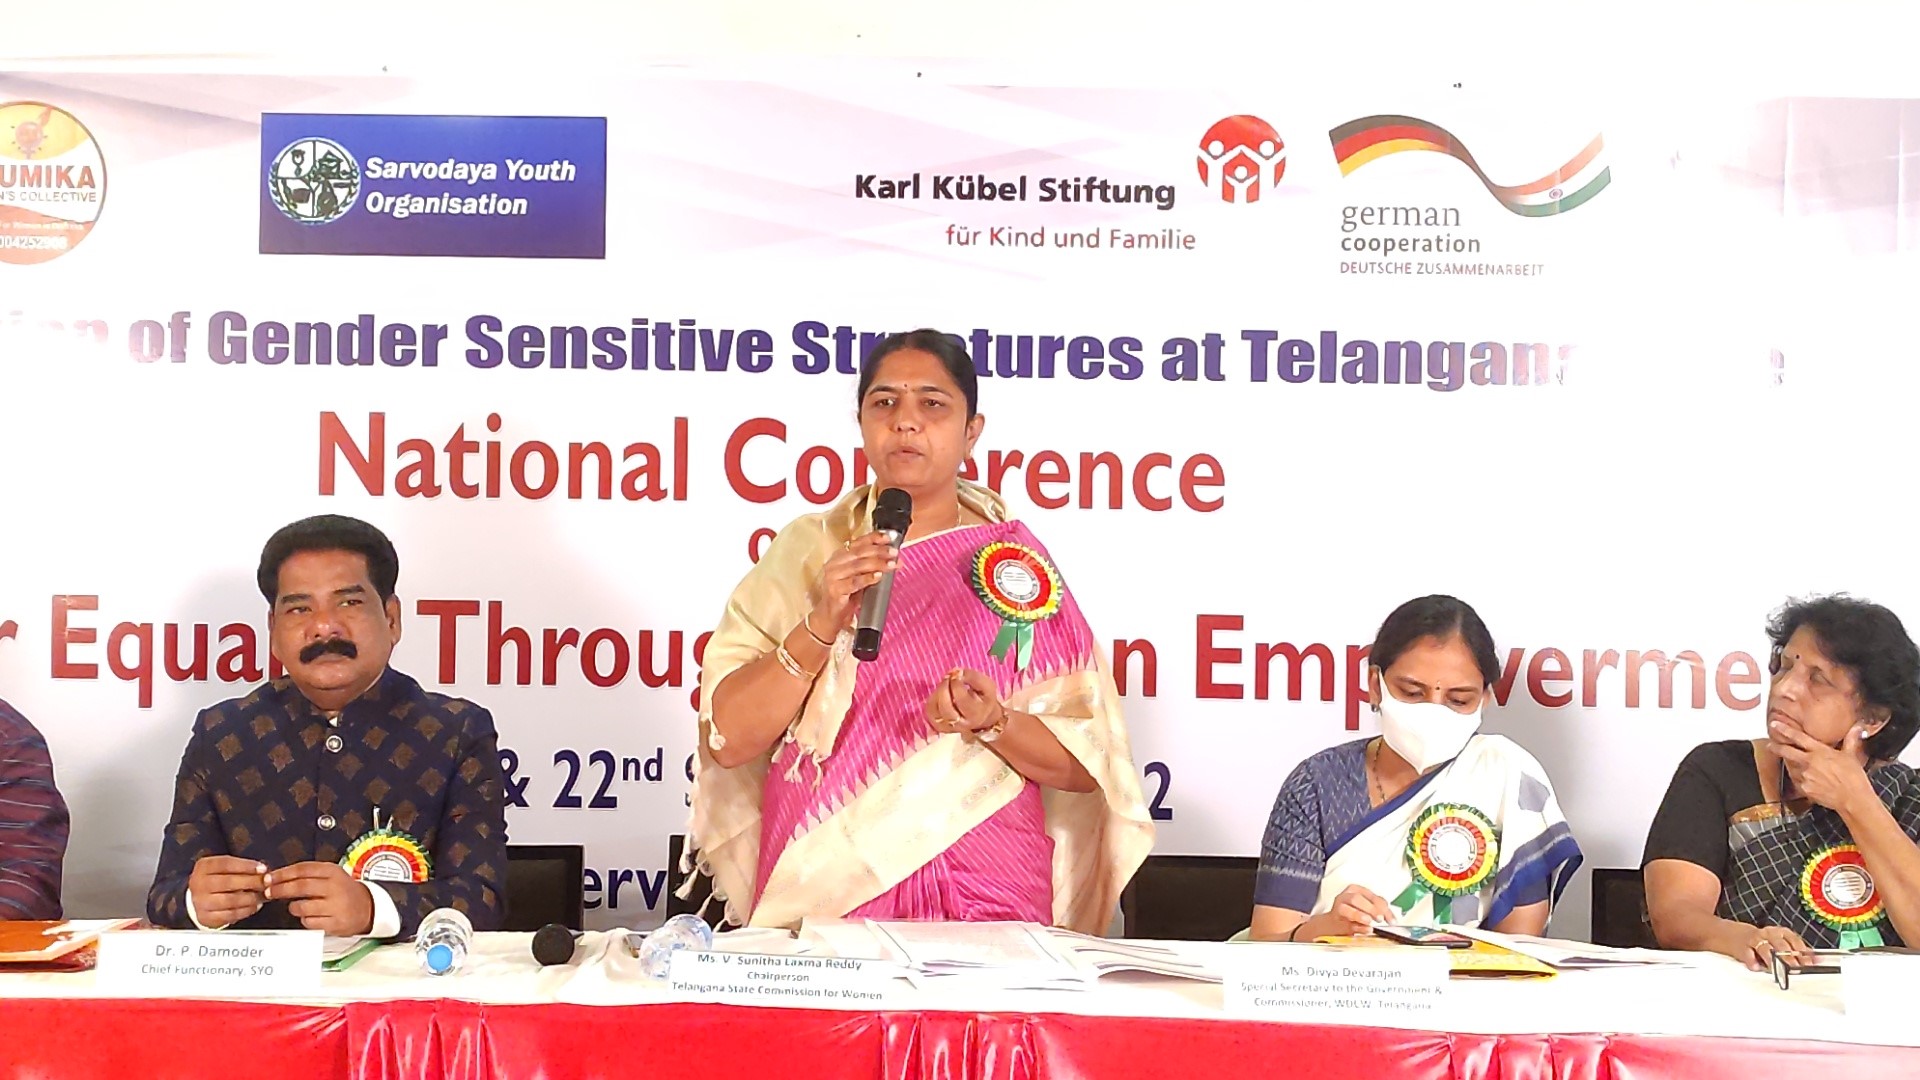  Development of society is not possible without women empowerment - Sunita Laxma Reddy 